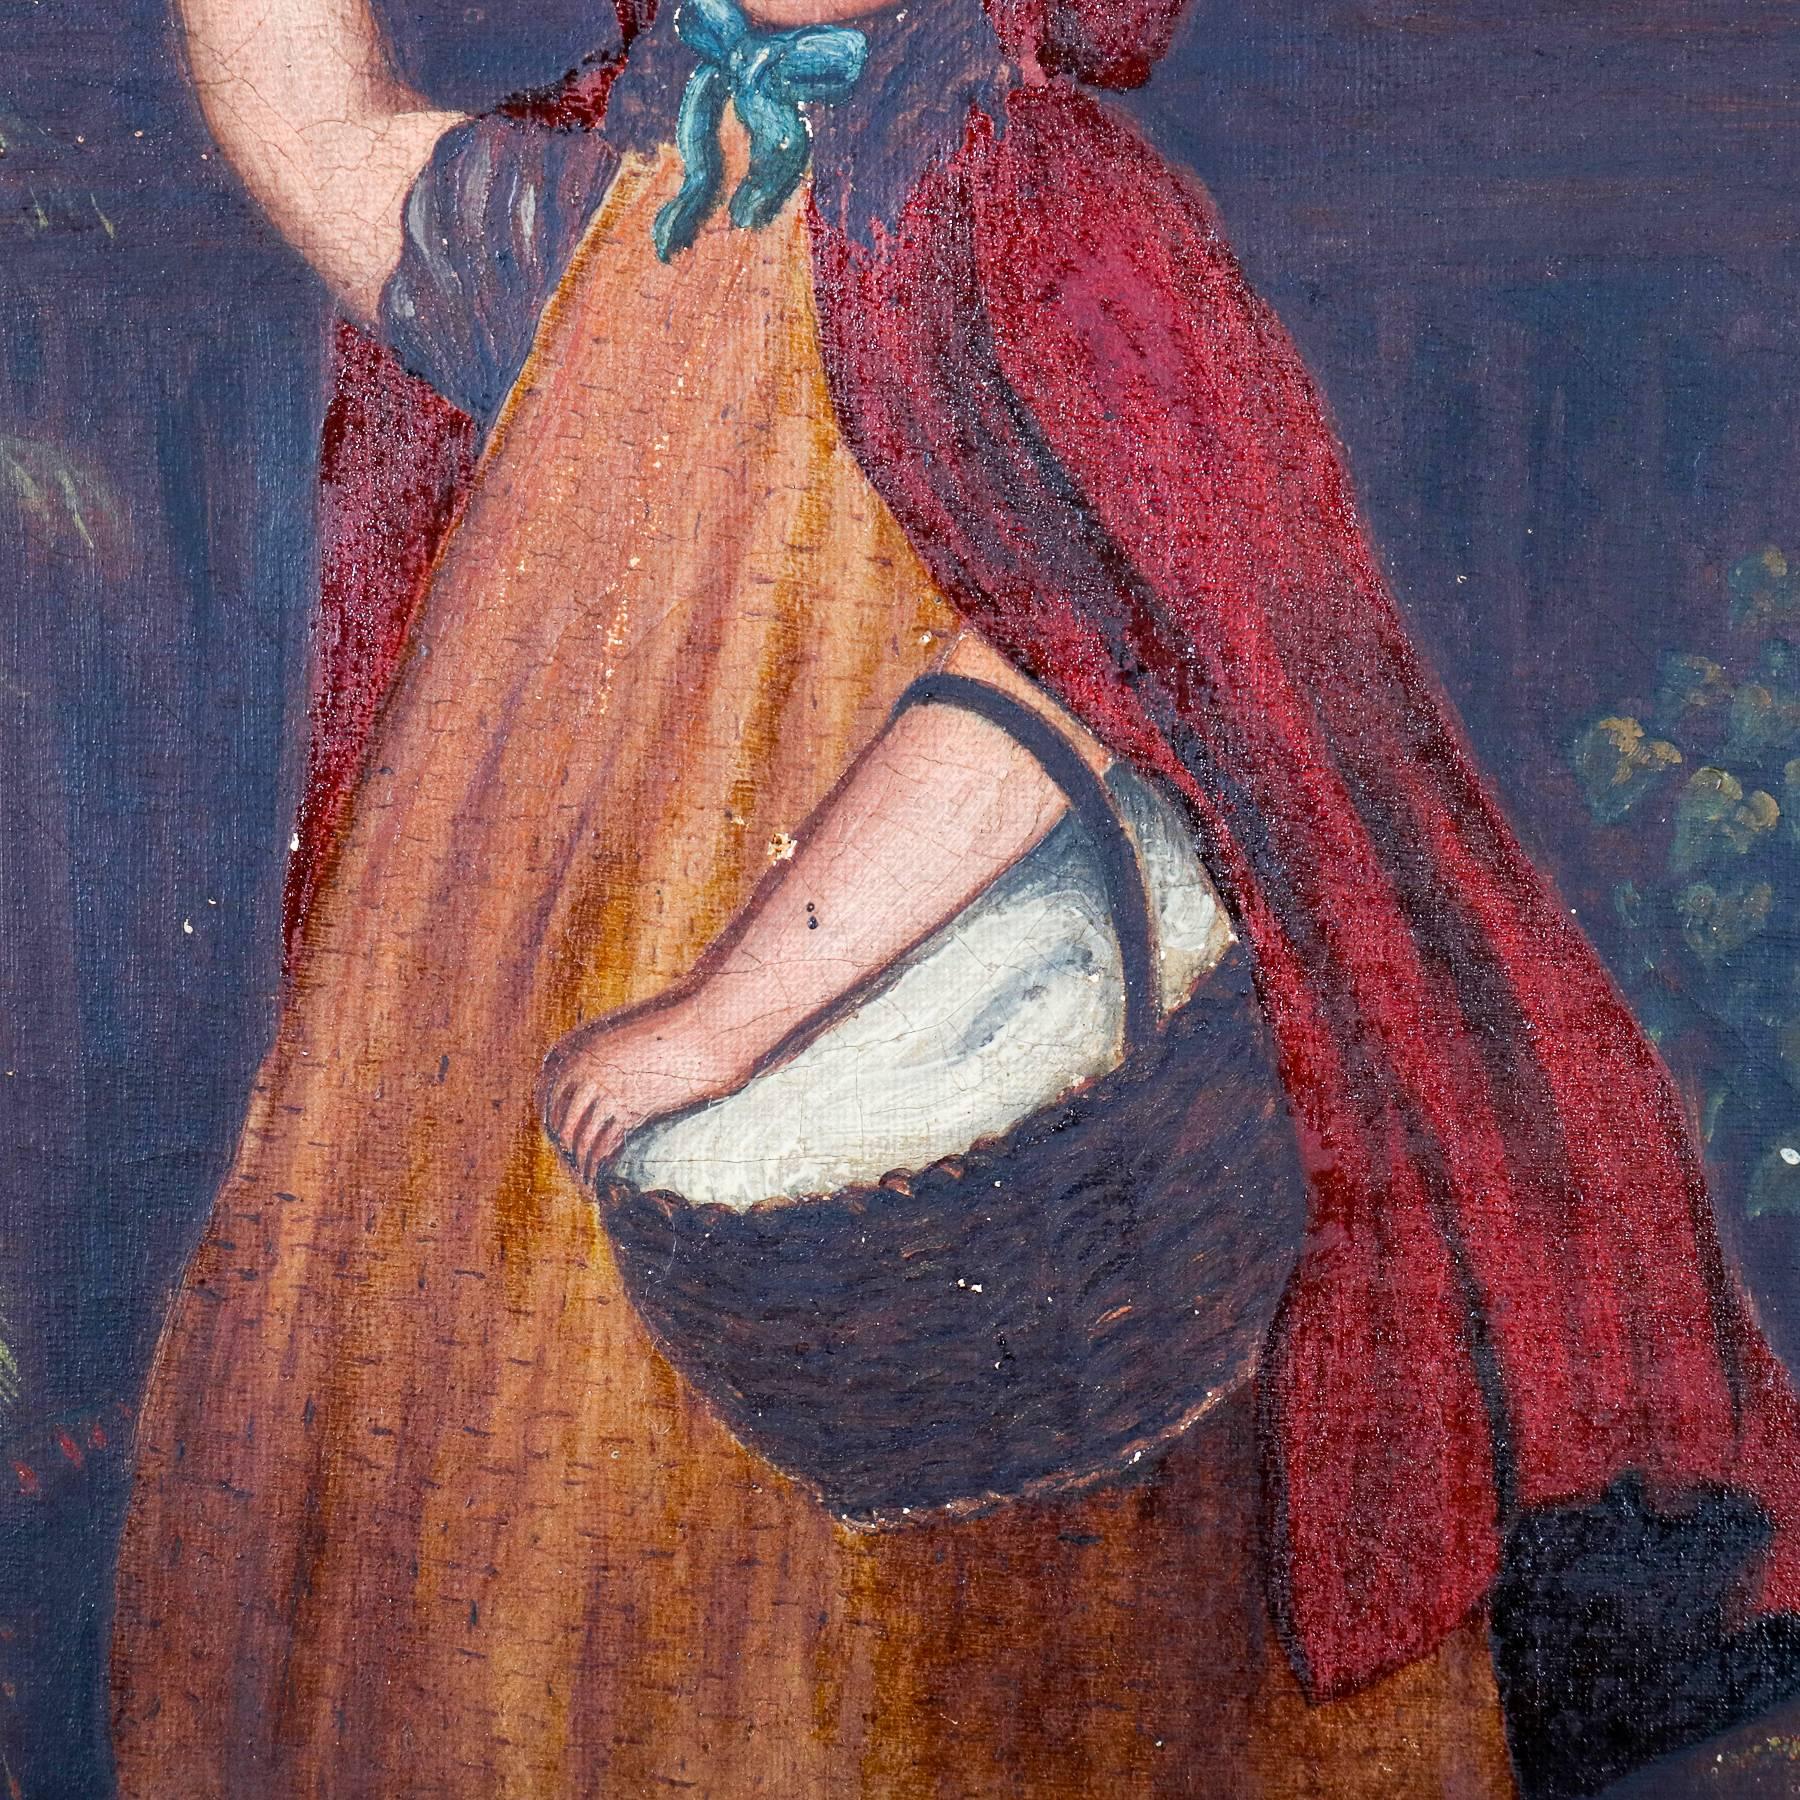 Hand-Painted Antique Oil on Canvas Folk Art Portrait Painting of Young Girl in Red Cape